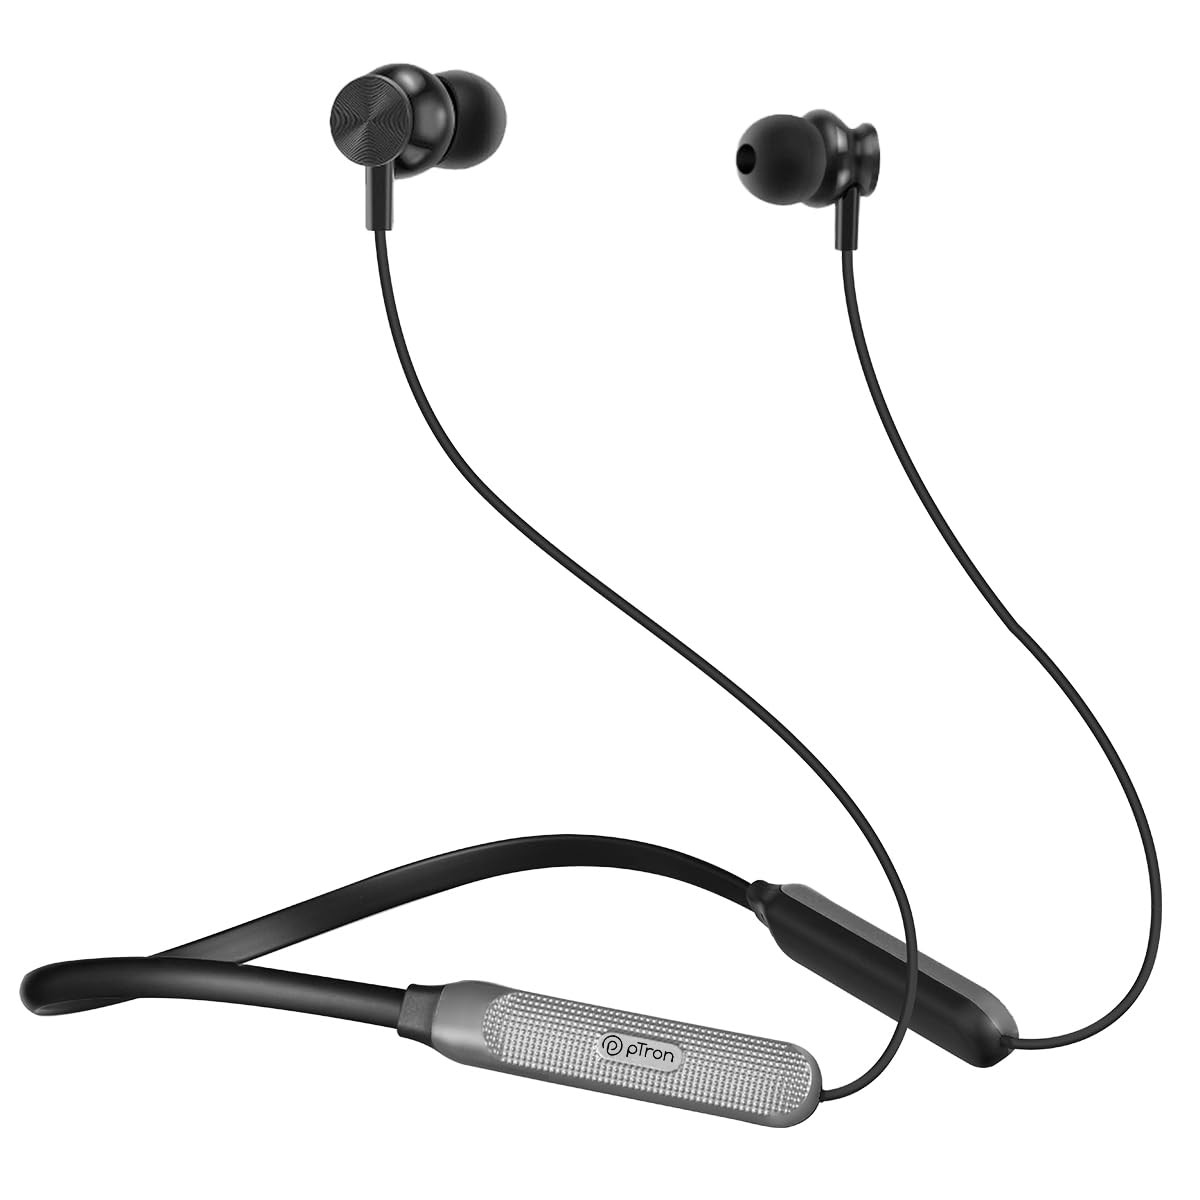 pTron Tangent Duo Bluetooth 52 Wireless in Ear Headphones 13mm Driver Deep Bass HD Calls Fast Charging Type-C Neckband Dual Pairing Voice Assistant  IPX4 Water Resistant BlackGrey